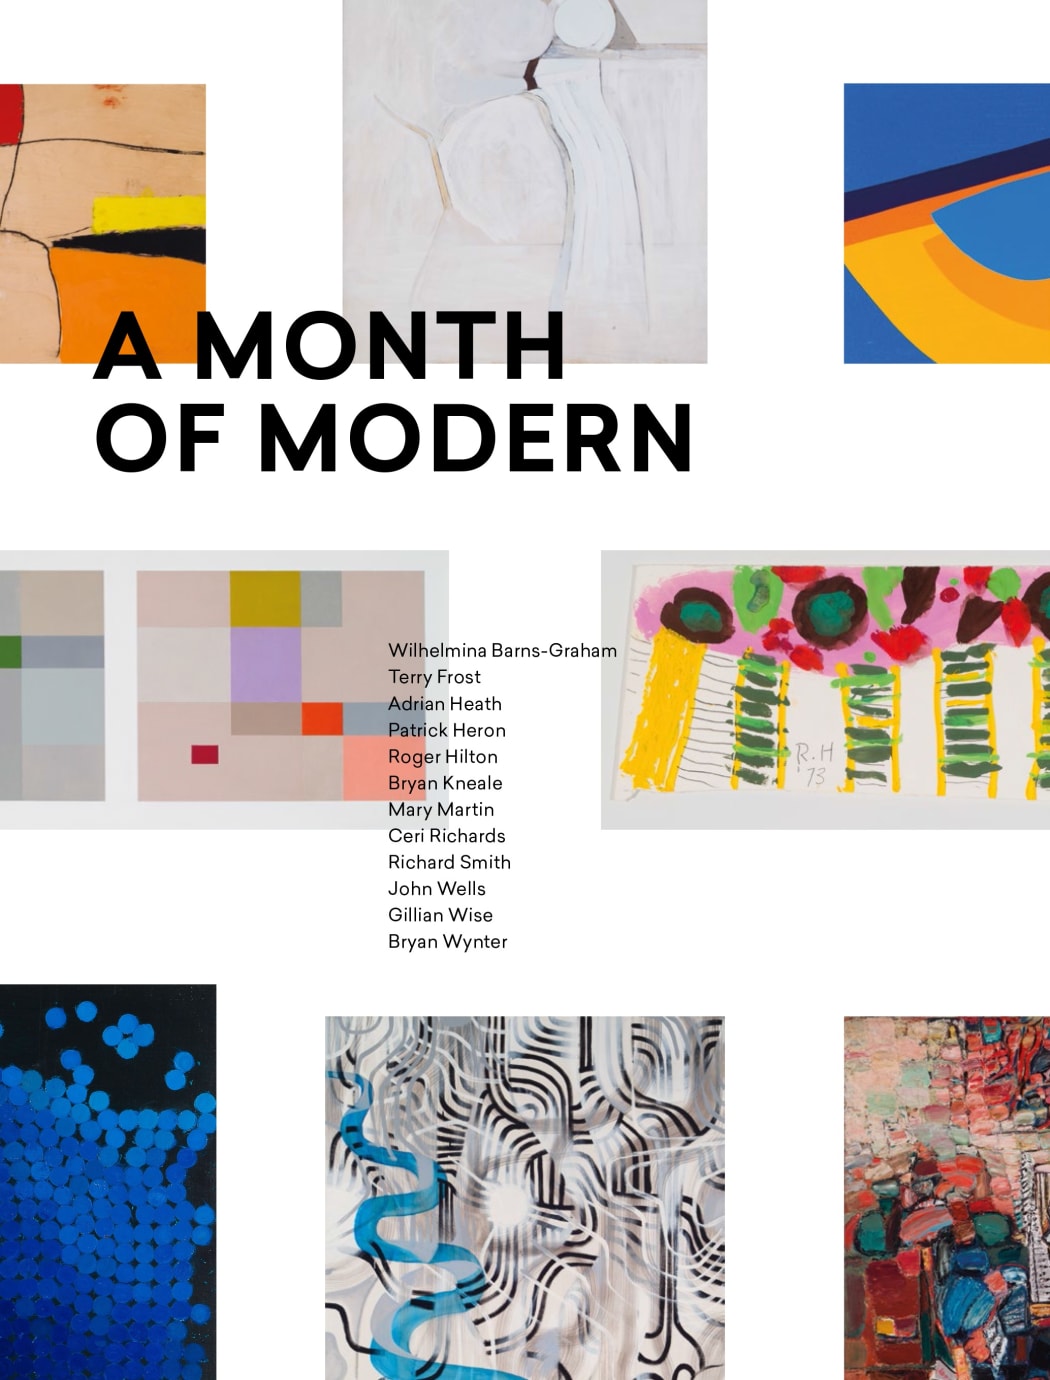 MODERN! THE VITALITY AND THE VARIETY OF BRITISH MODERN ART BY MEL GOODING